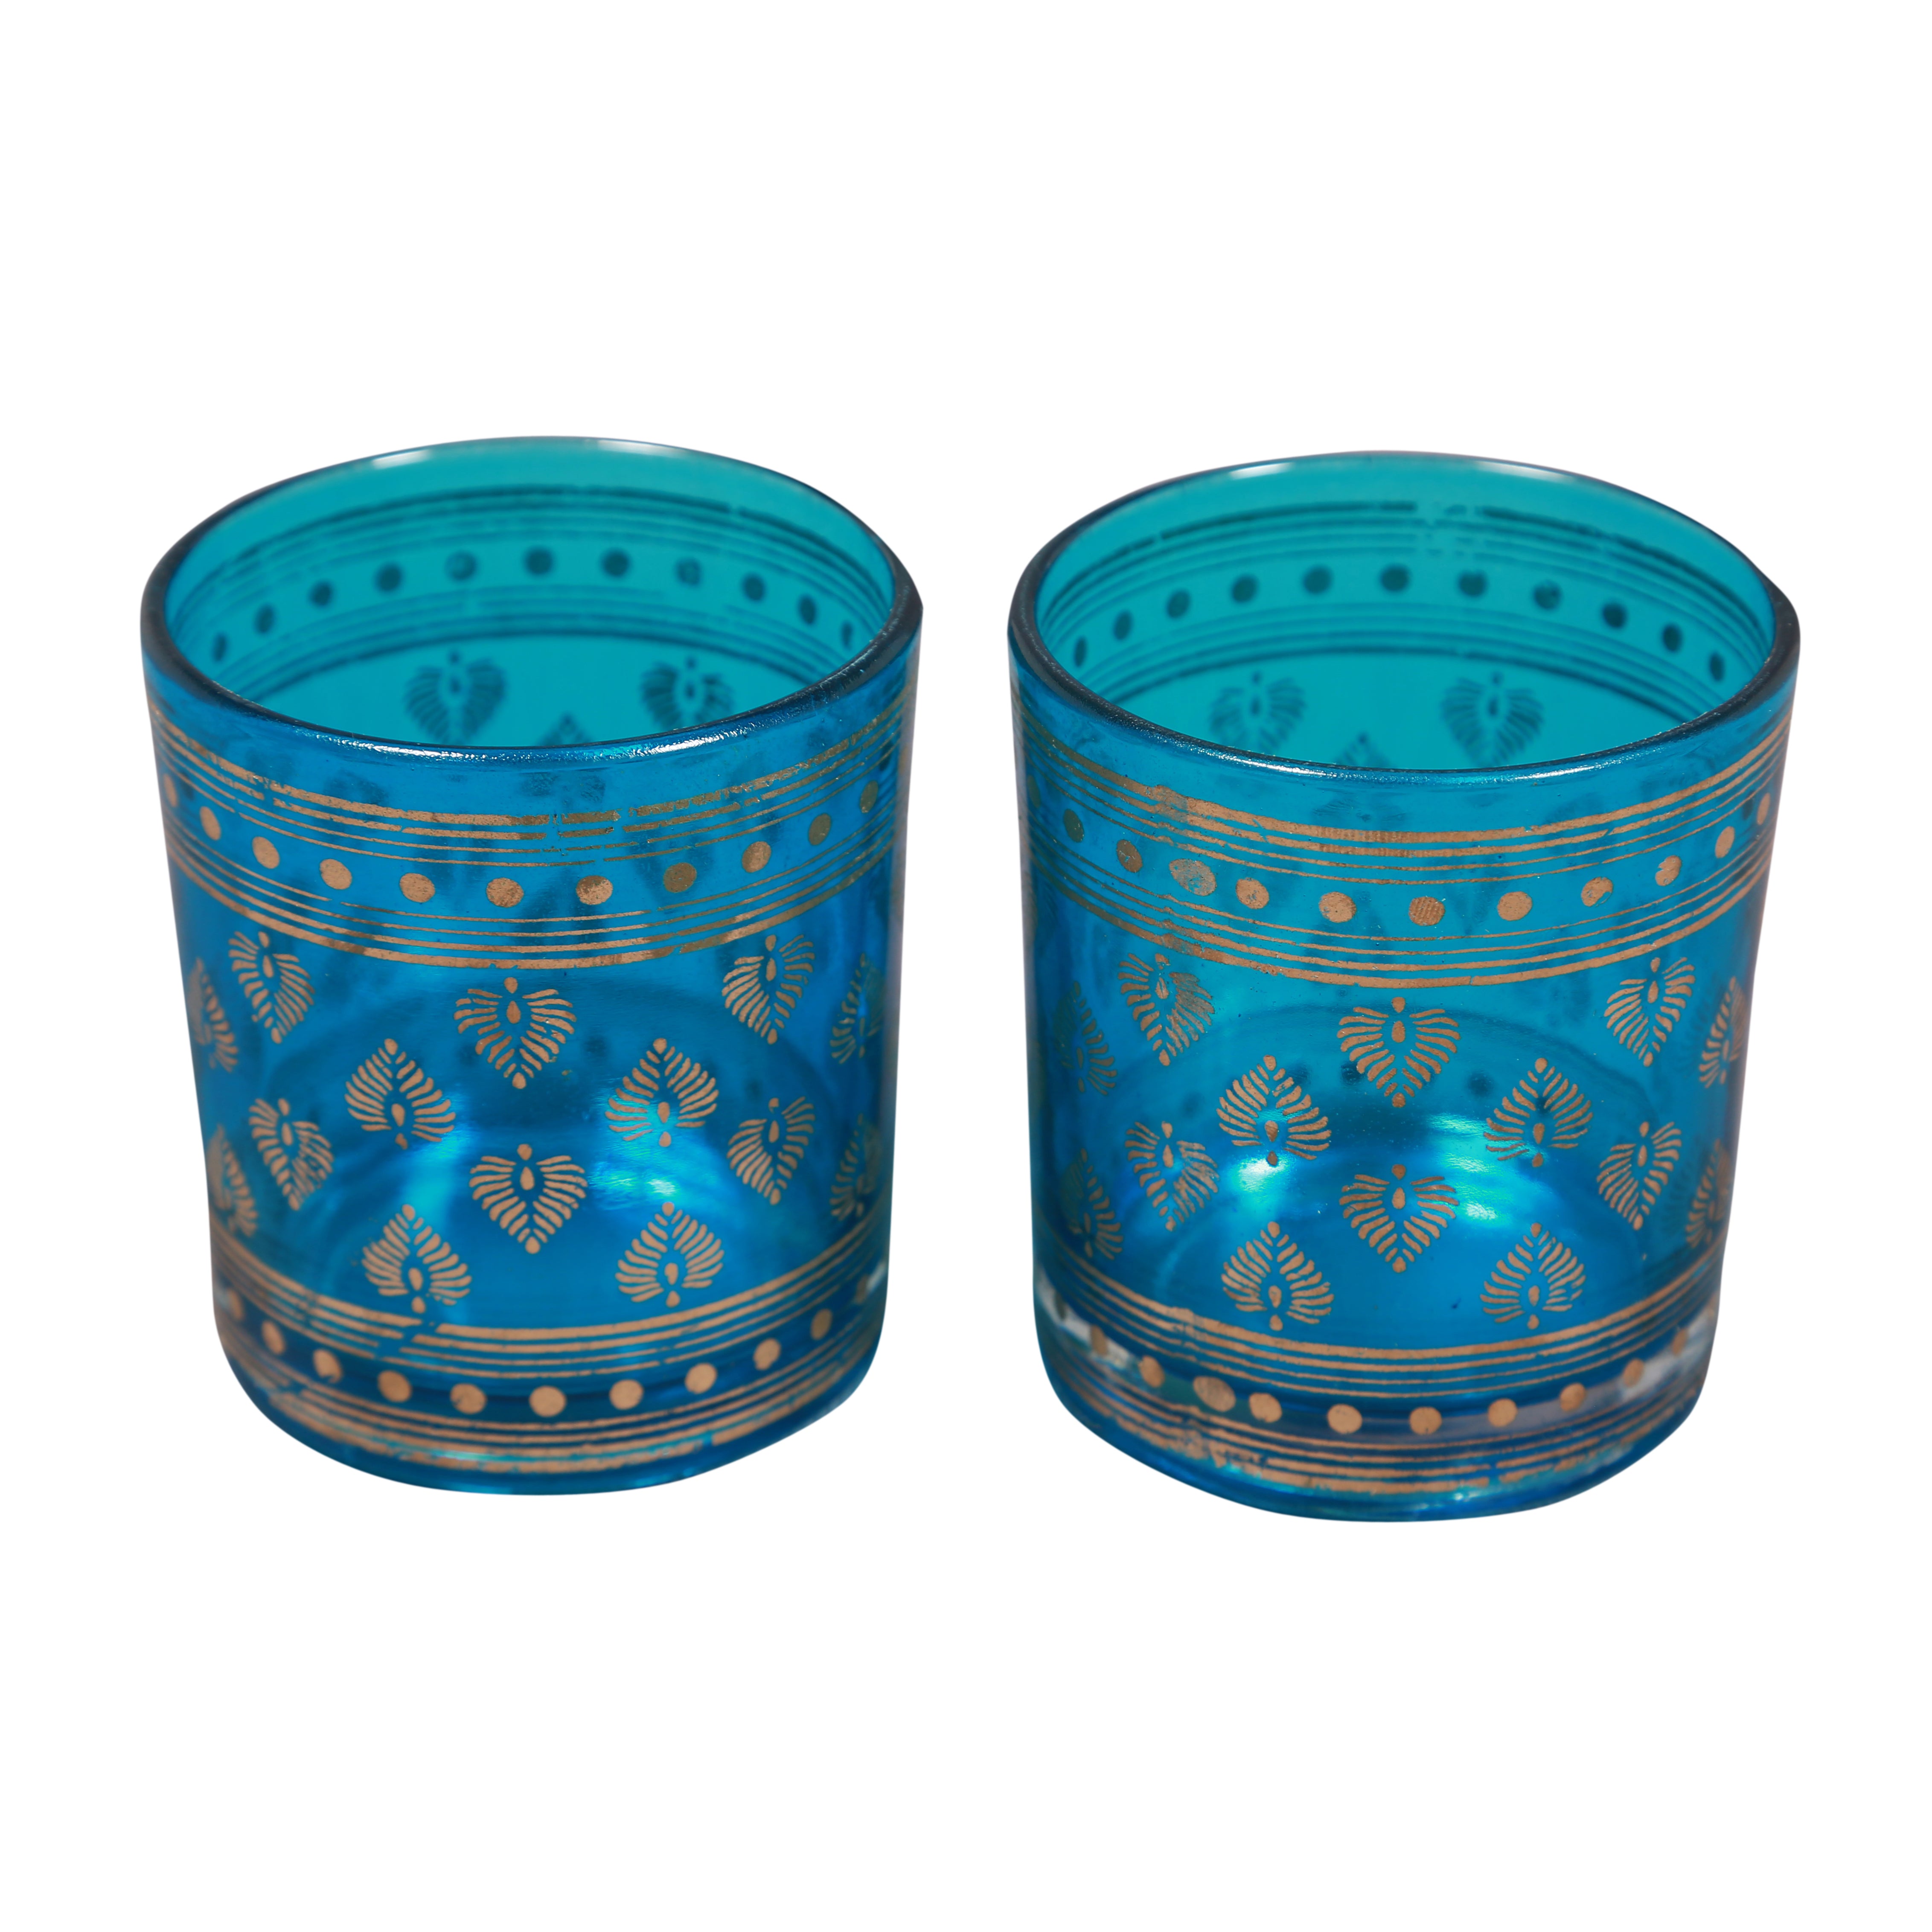 Tea Glass blue set of 2, 3.2 inches tall